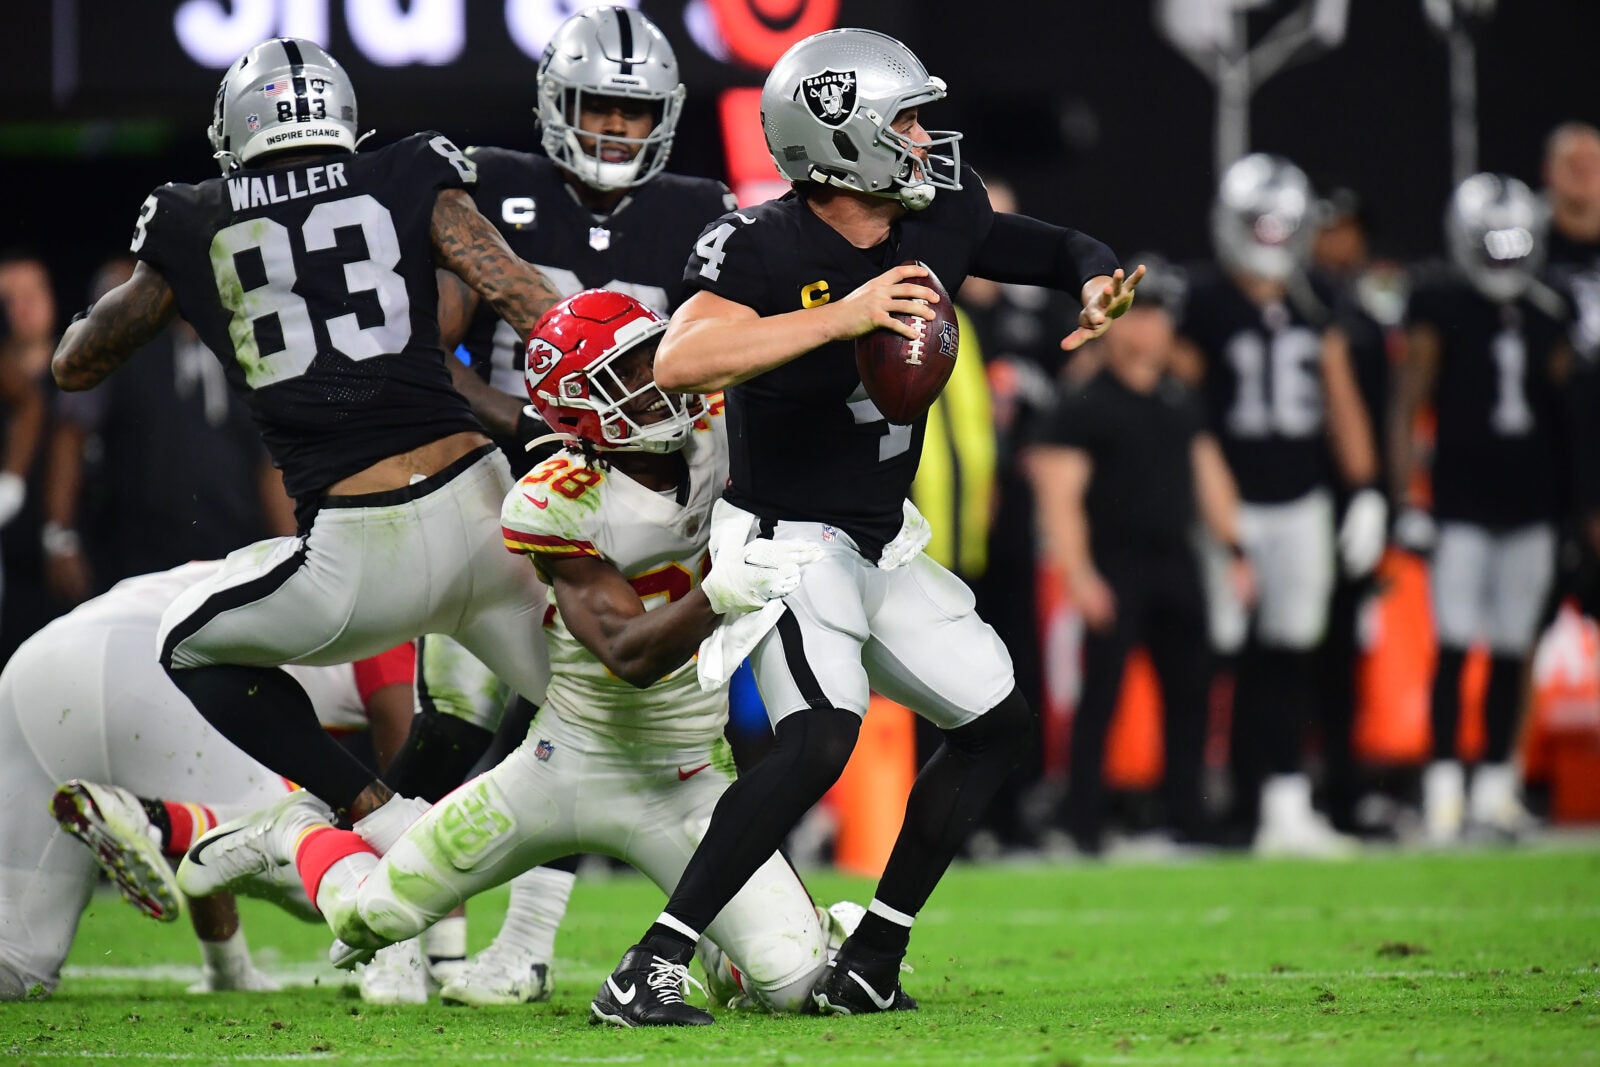 Turnovers and penalties hurt Las Vegas Raiders in 41-14 SNF home loss